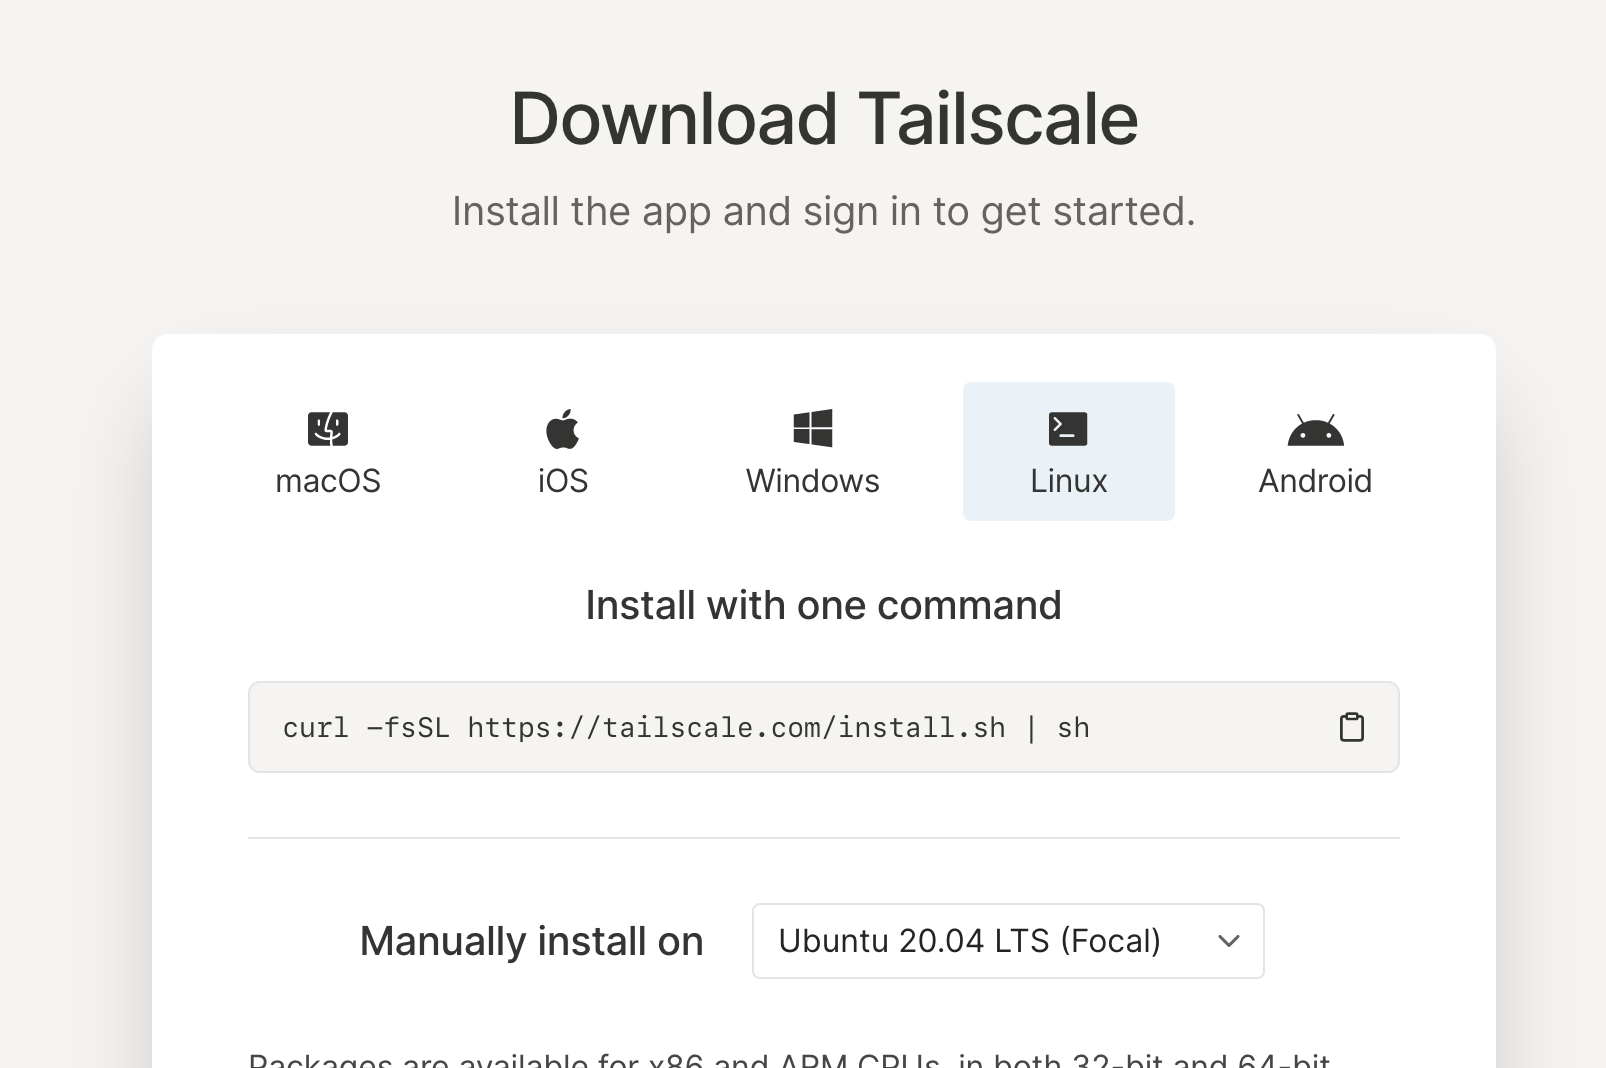 A screenshot of the download page on tailscale.com